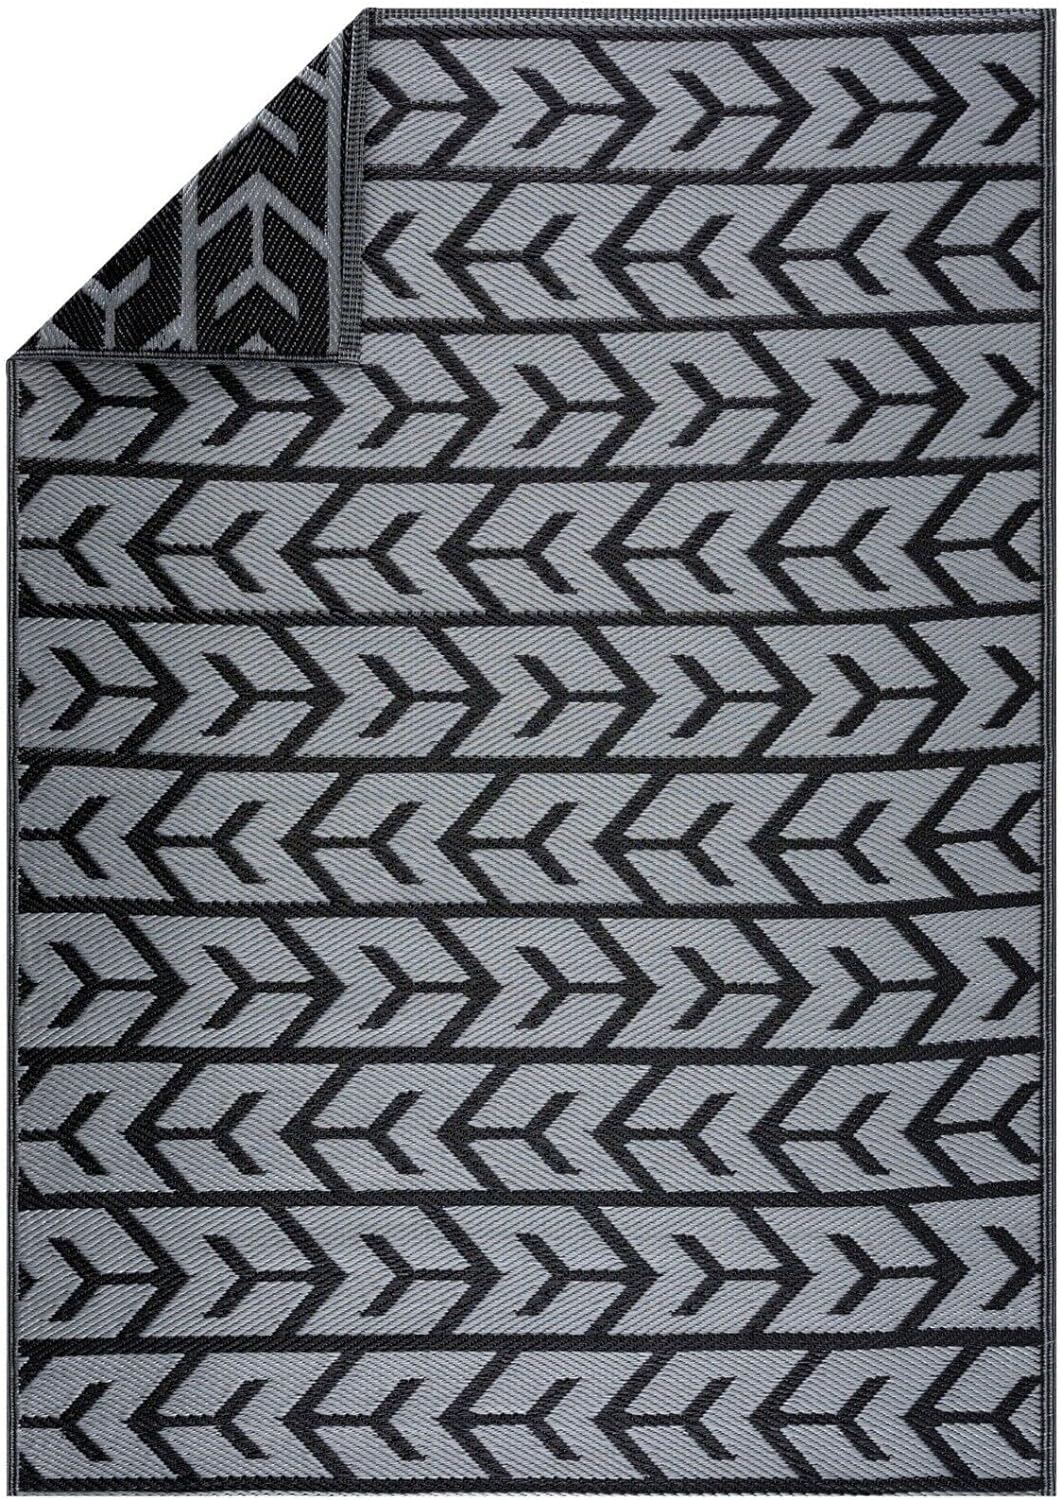 Playa Outdoor Rug - Crease-Free Recycled Plastic Floor Mat for Patio, Camping, Beach, Balcony, Porch, Deck - Weather, Water, Stain, Lightweight, Fade and UV Resistant - Amsterdam- Black & Gray